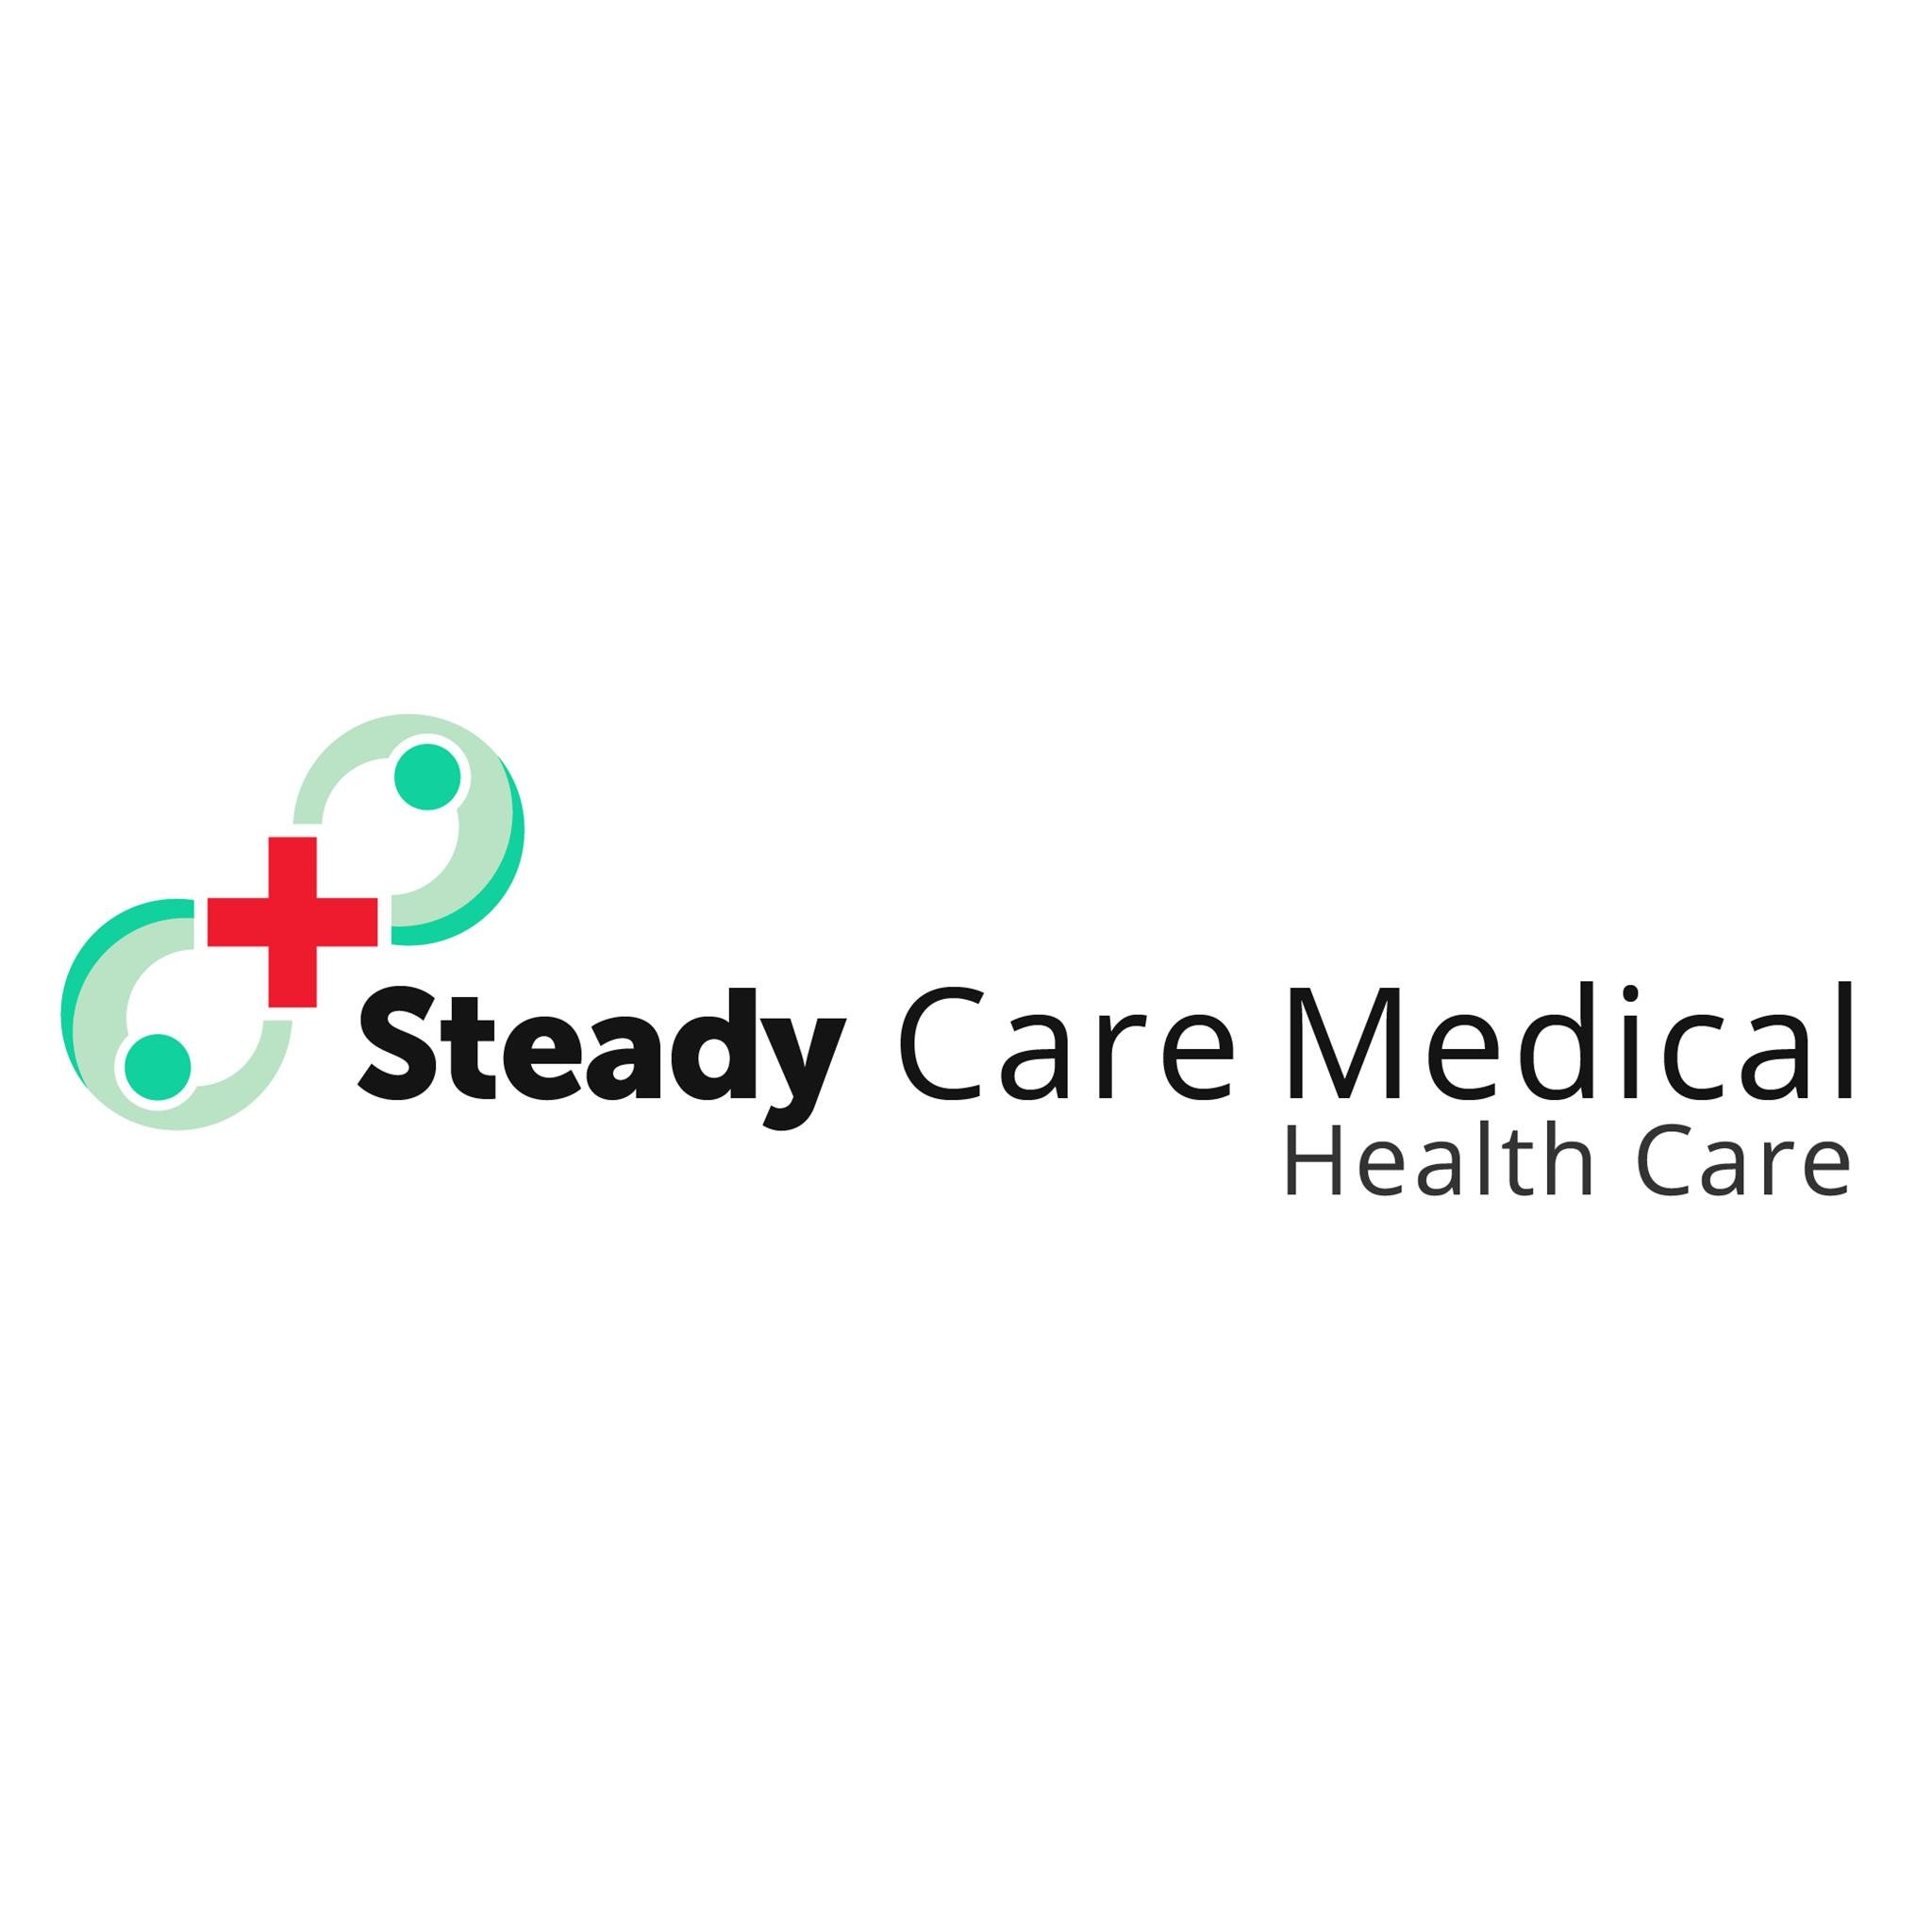 Our mission at Steady Care Medical is to provide patients with excellent comprehensive primary health care through a variety of medical services.